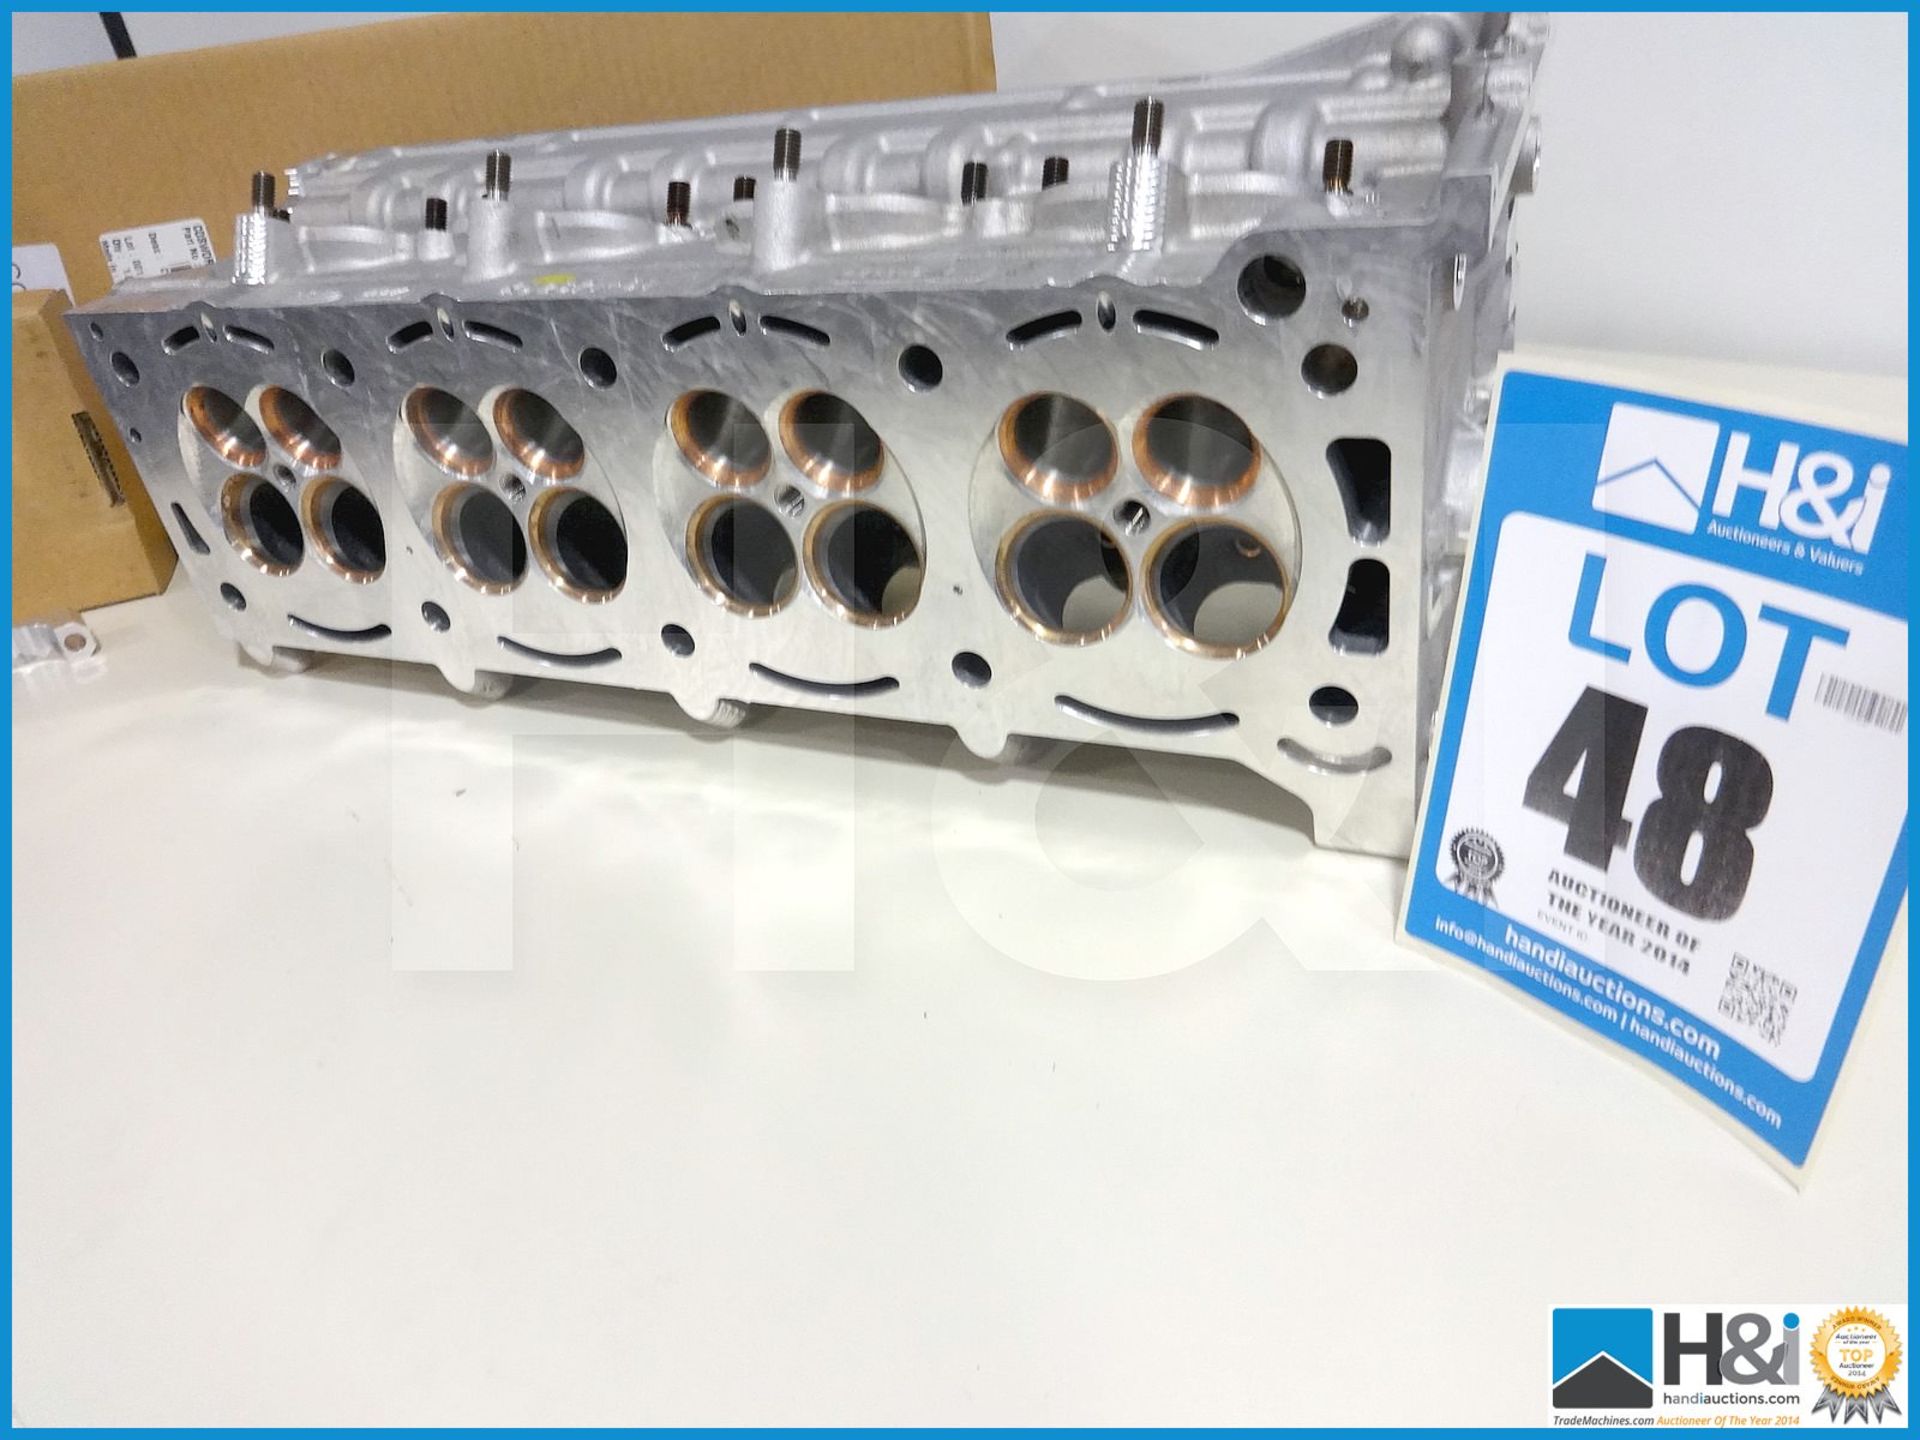 1 off Cosworth XG RH cylinder head assembly - shallow. Valued at over GBP 10,000. MC: XG8640 CILN: 1